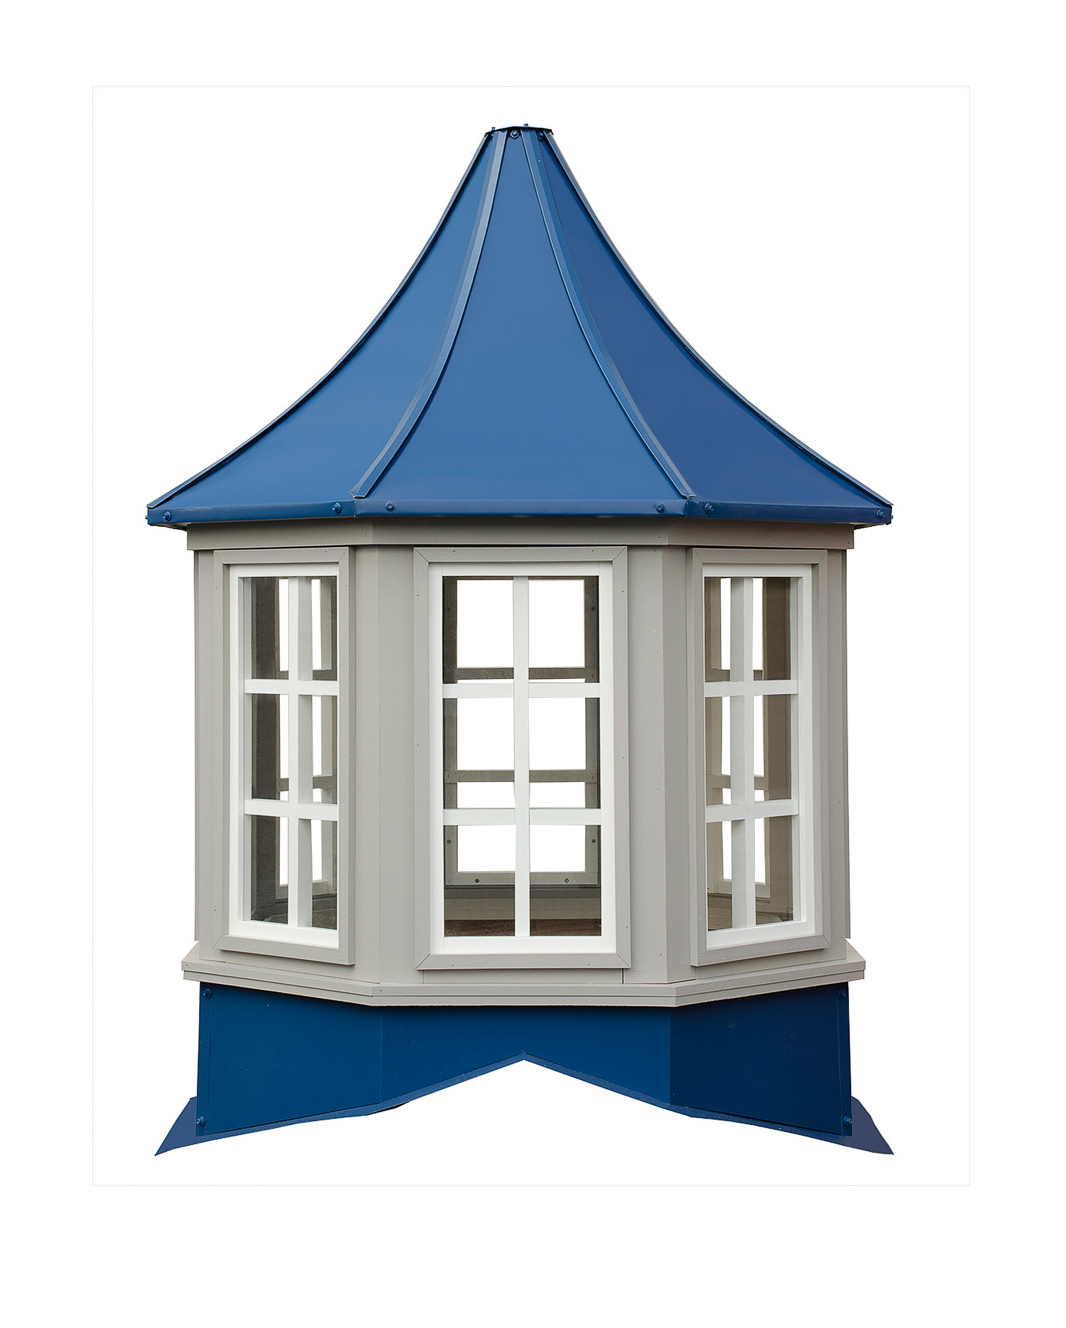 Millennial Series Cupolas - Norwell Octagon With Windows